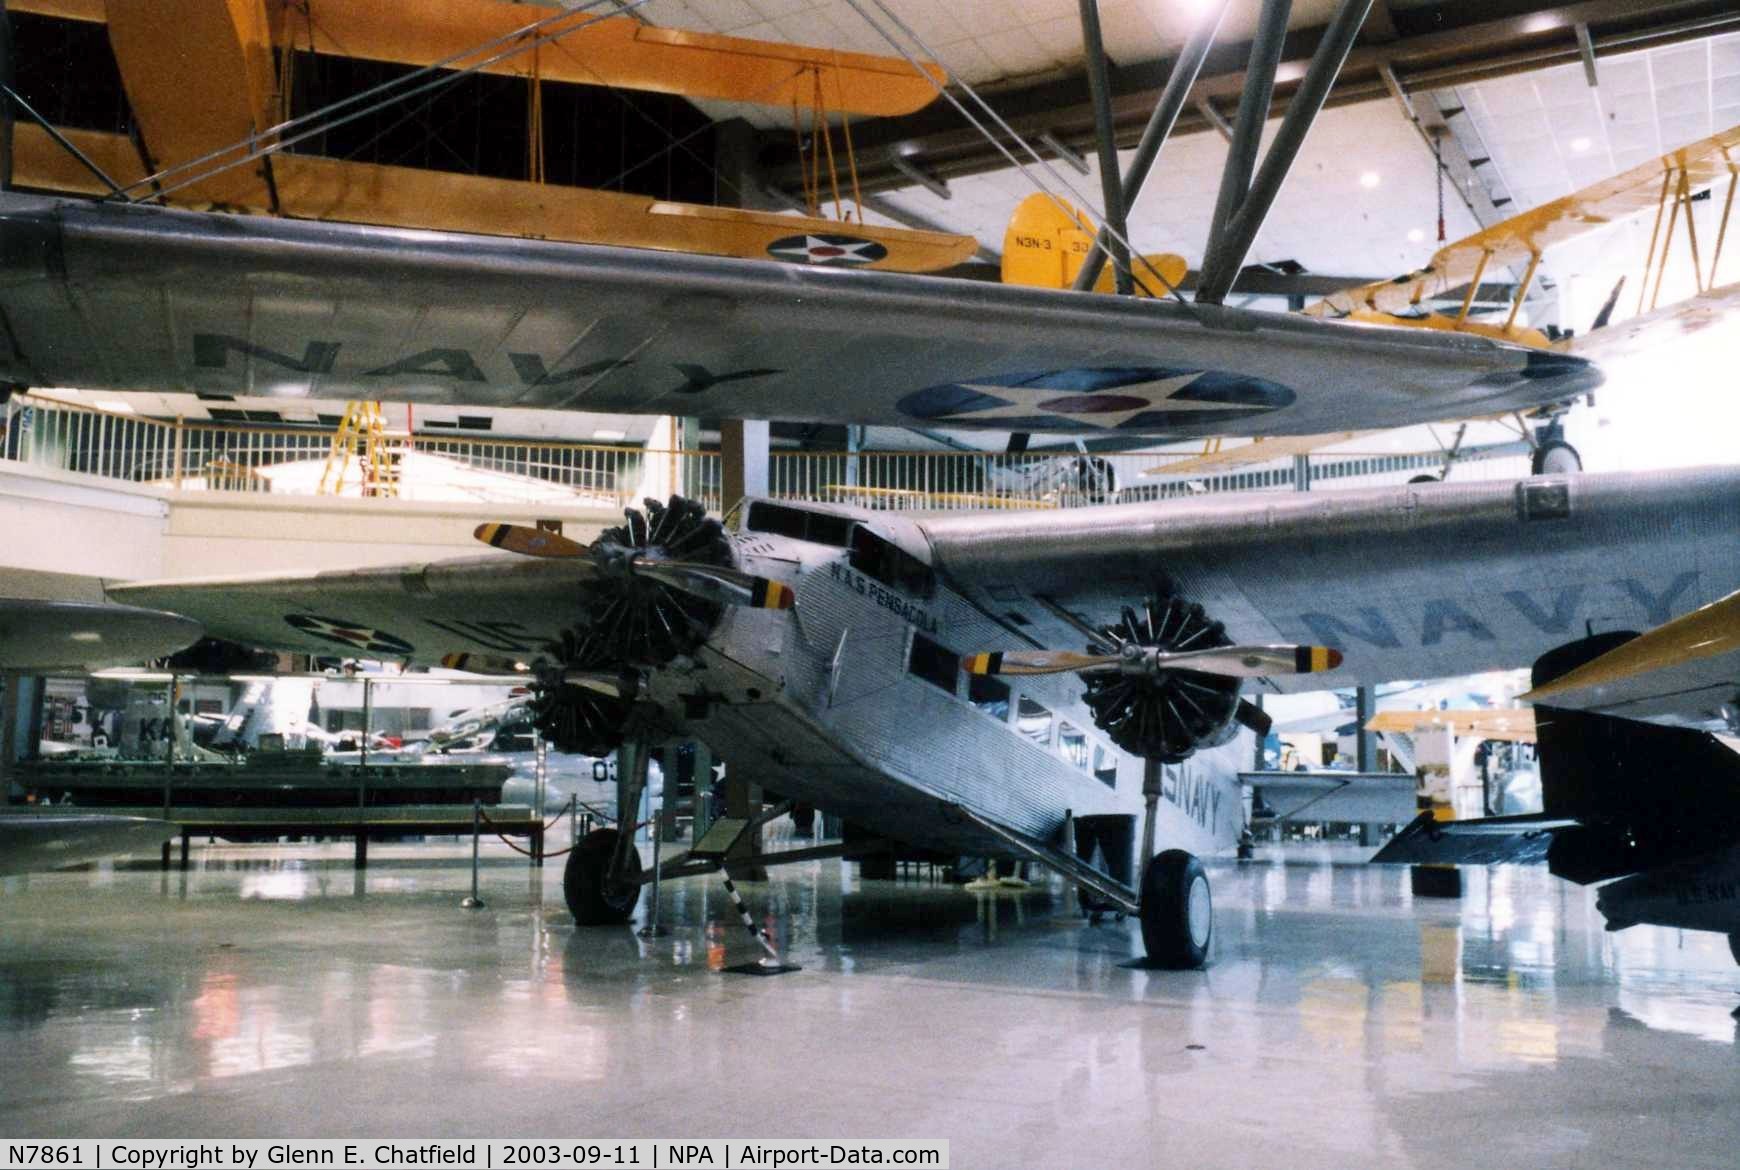 N7861, Ford 4-AT-E Tri-Motor C/N 4-AT-46, Ford Tri-Motor at the National Museum of Naval Aviation